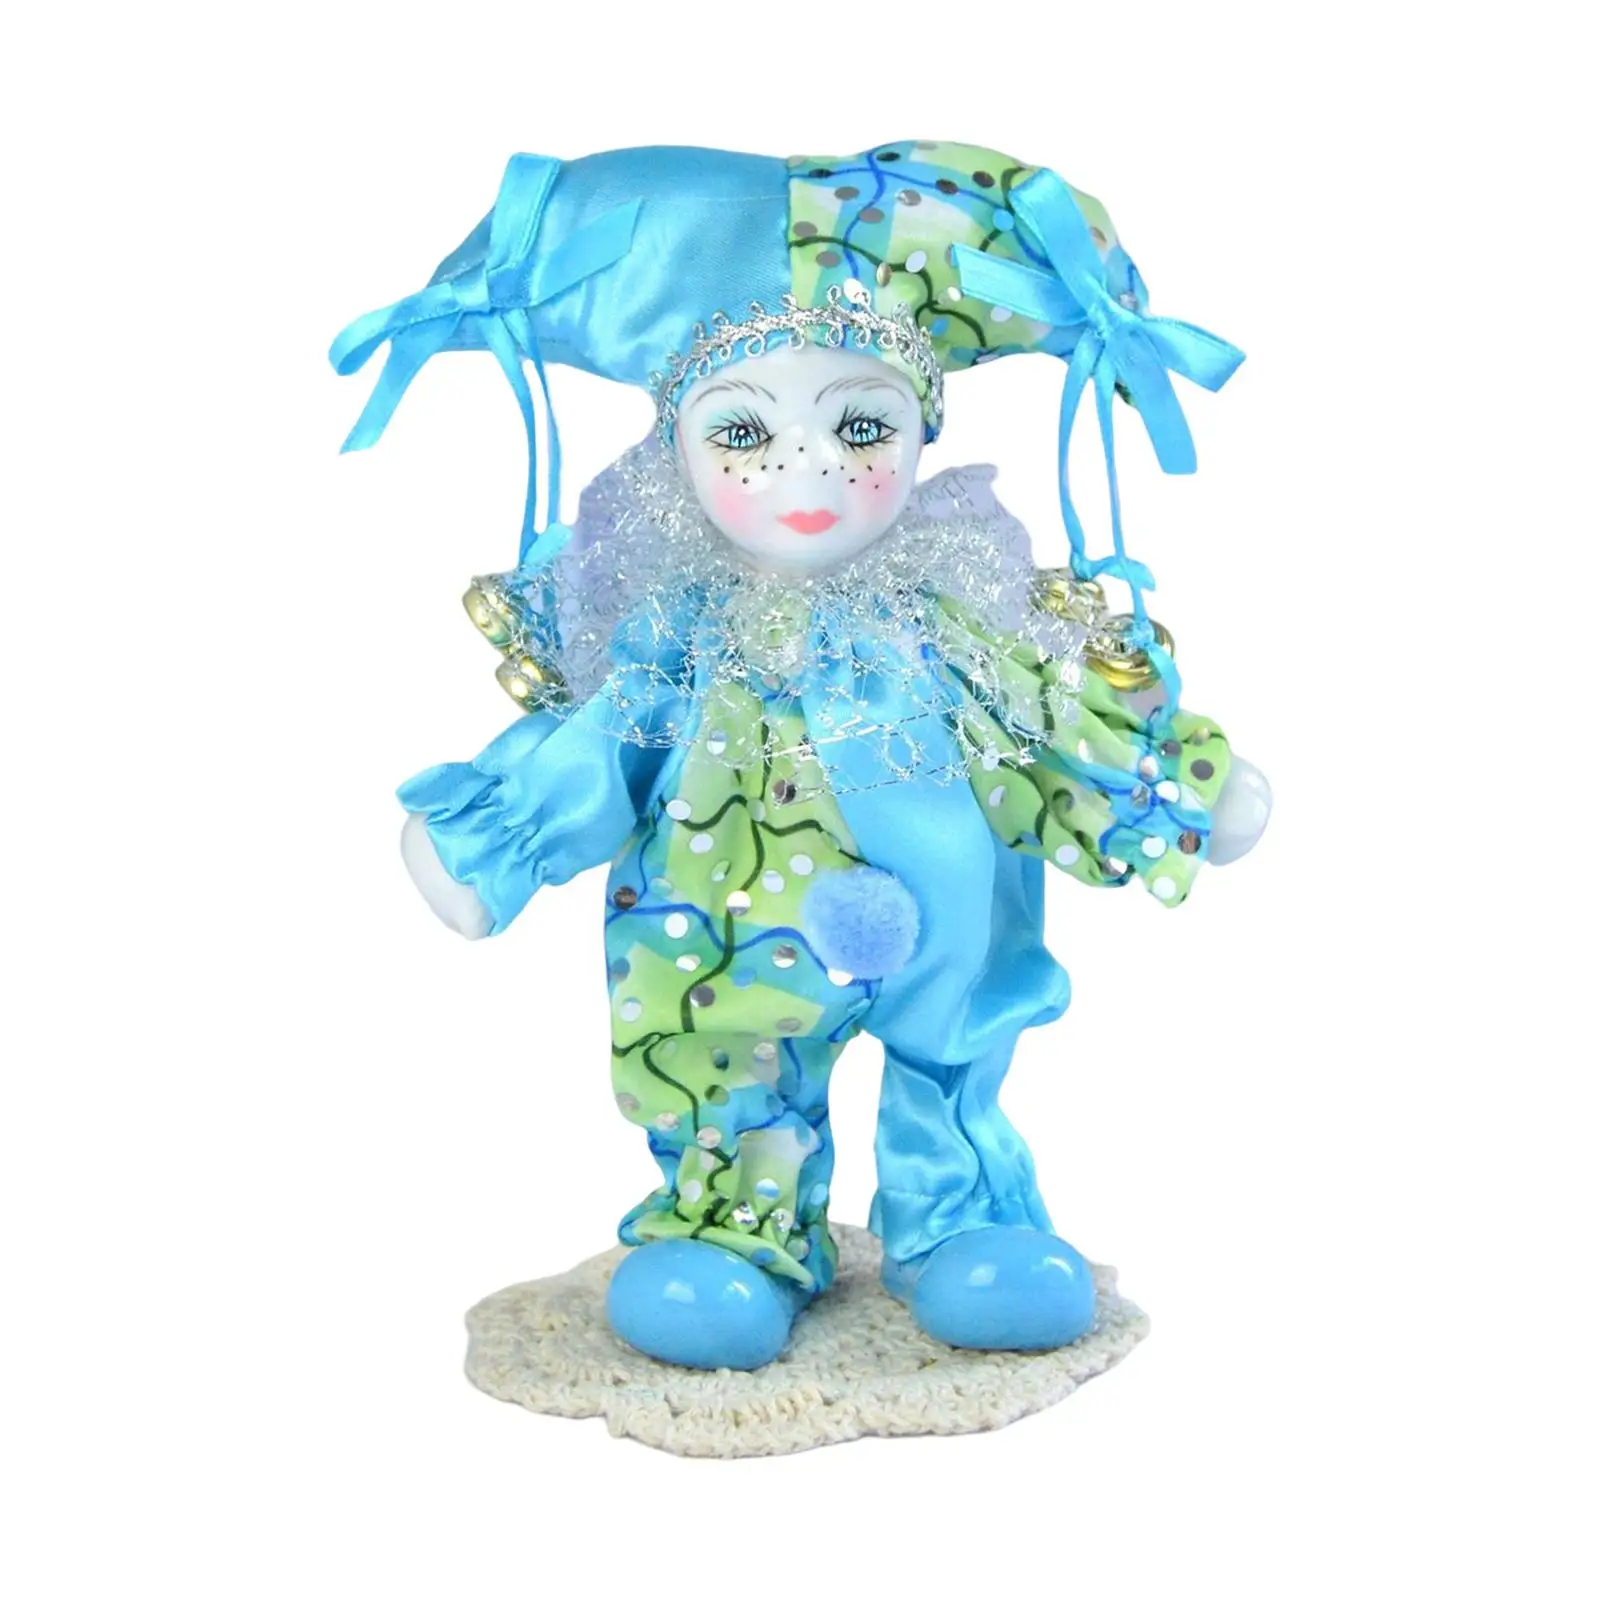 Clown Doll Dressed in Dramatic Outfits Porcelain Doll Figurine for Game Prop